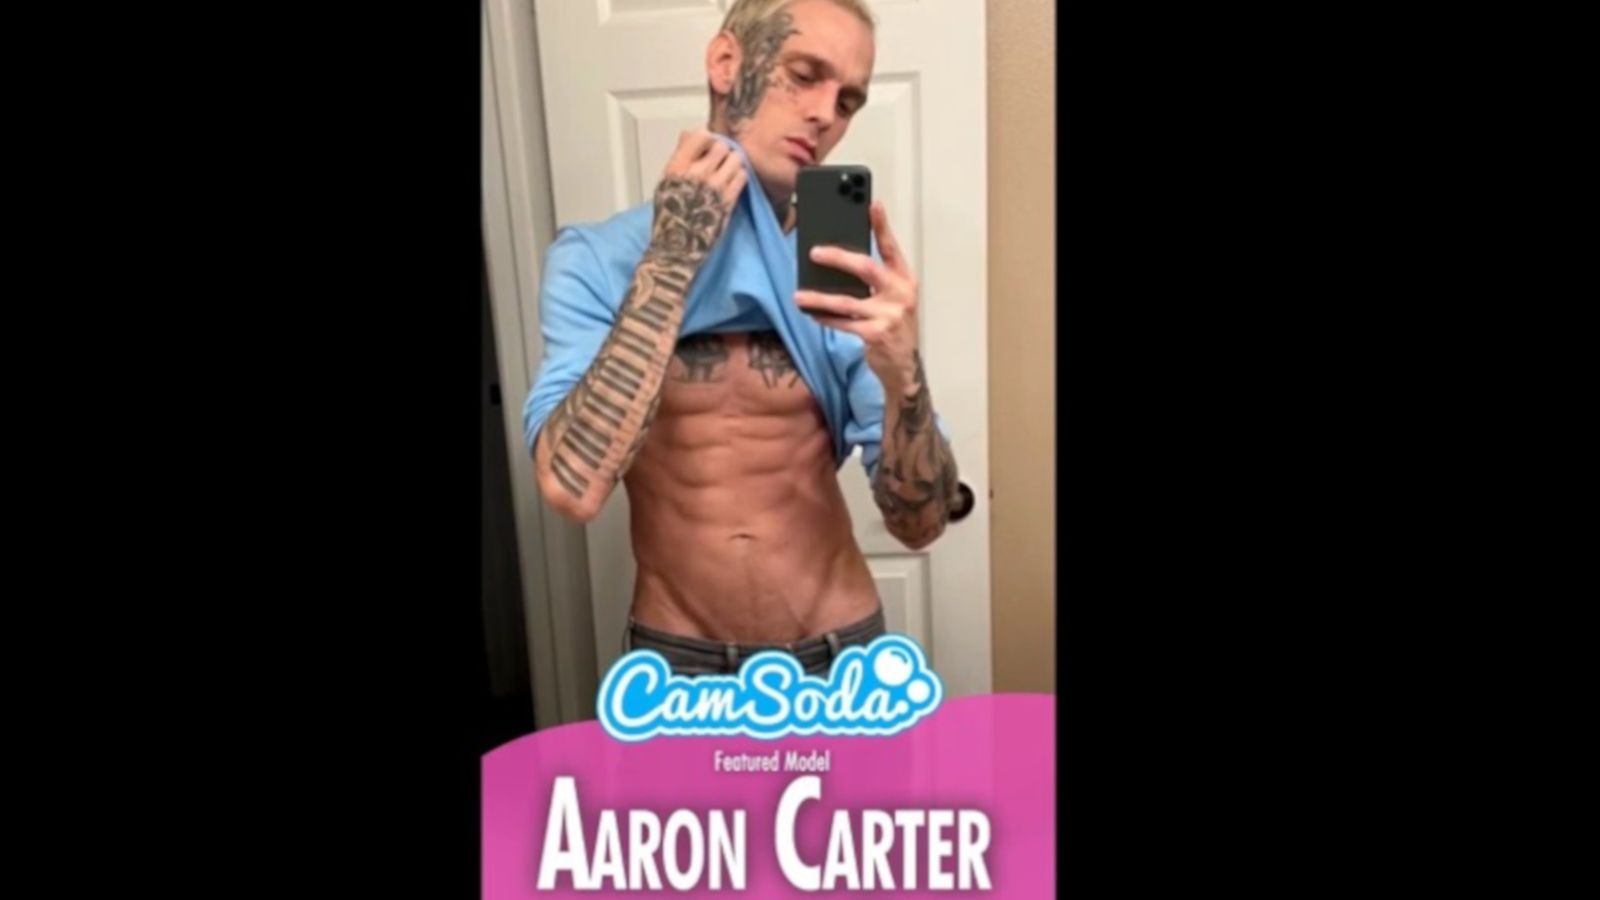 Aaron Carter to Perform His Music Live on CamSoda Tonight